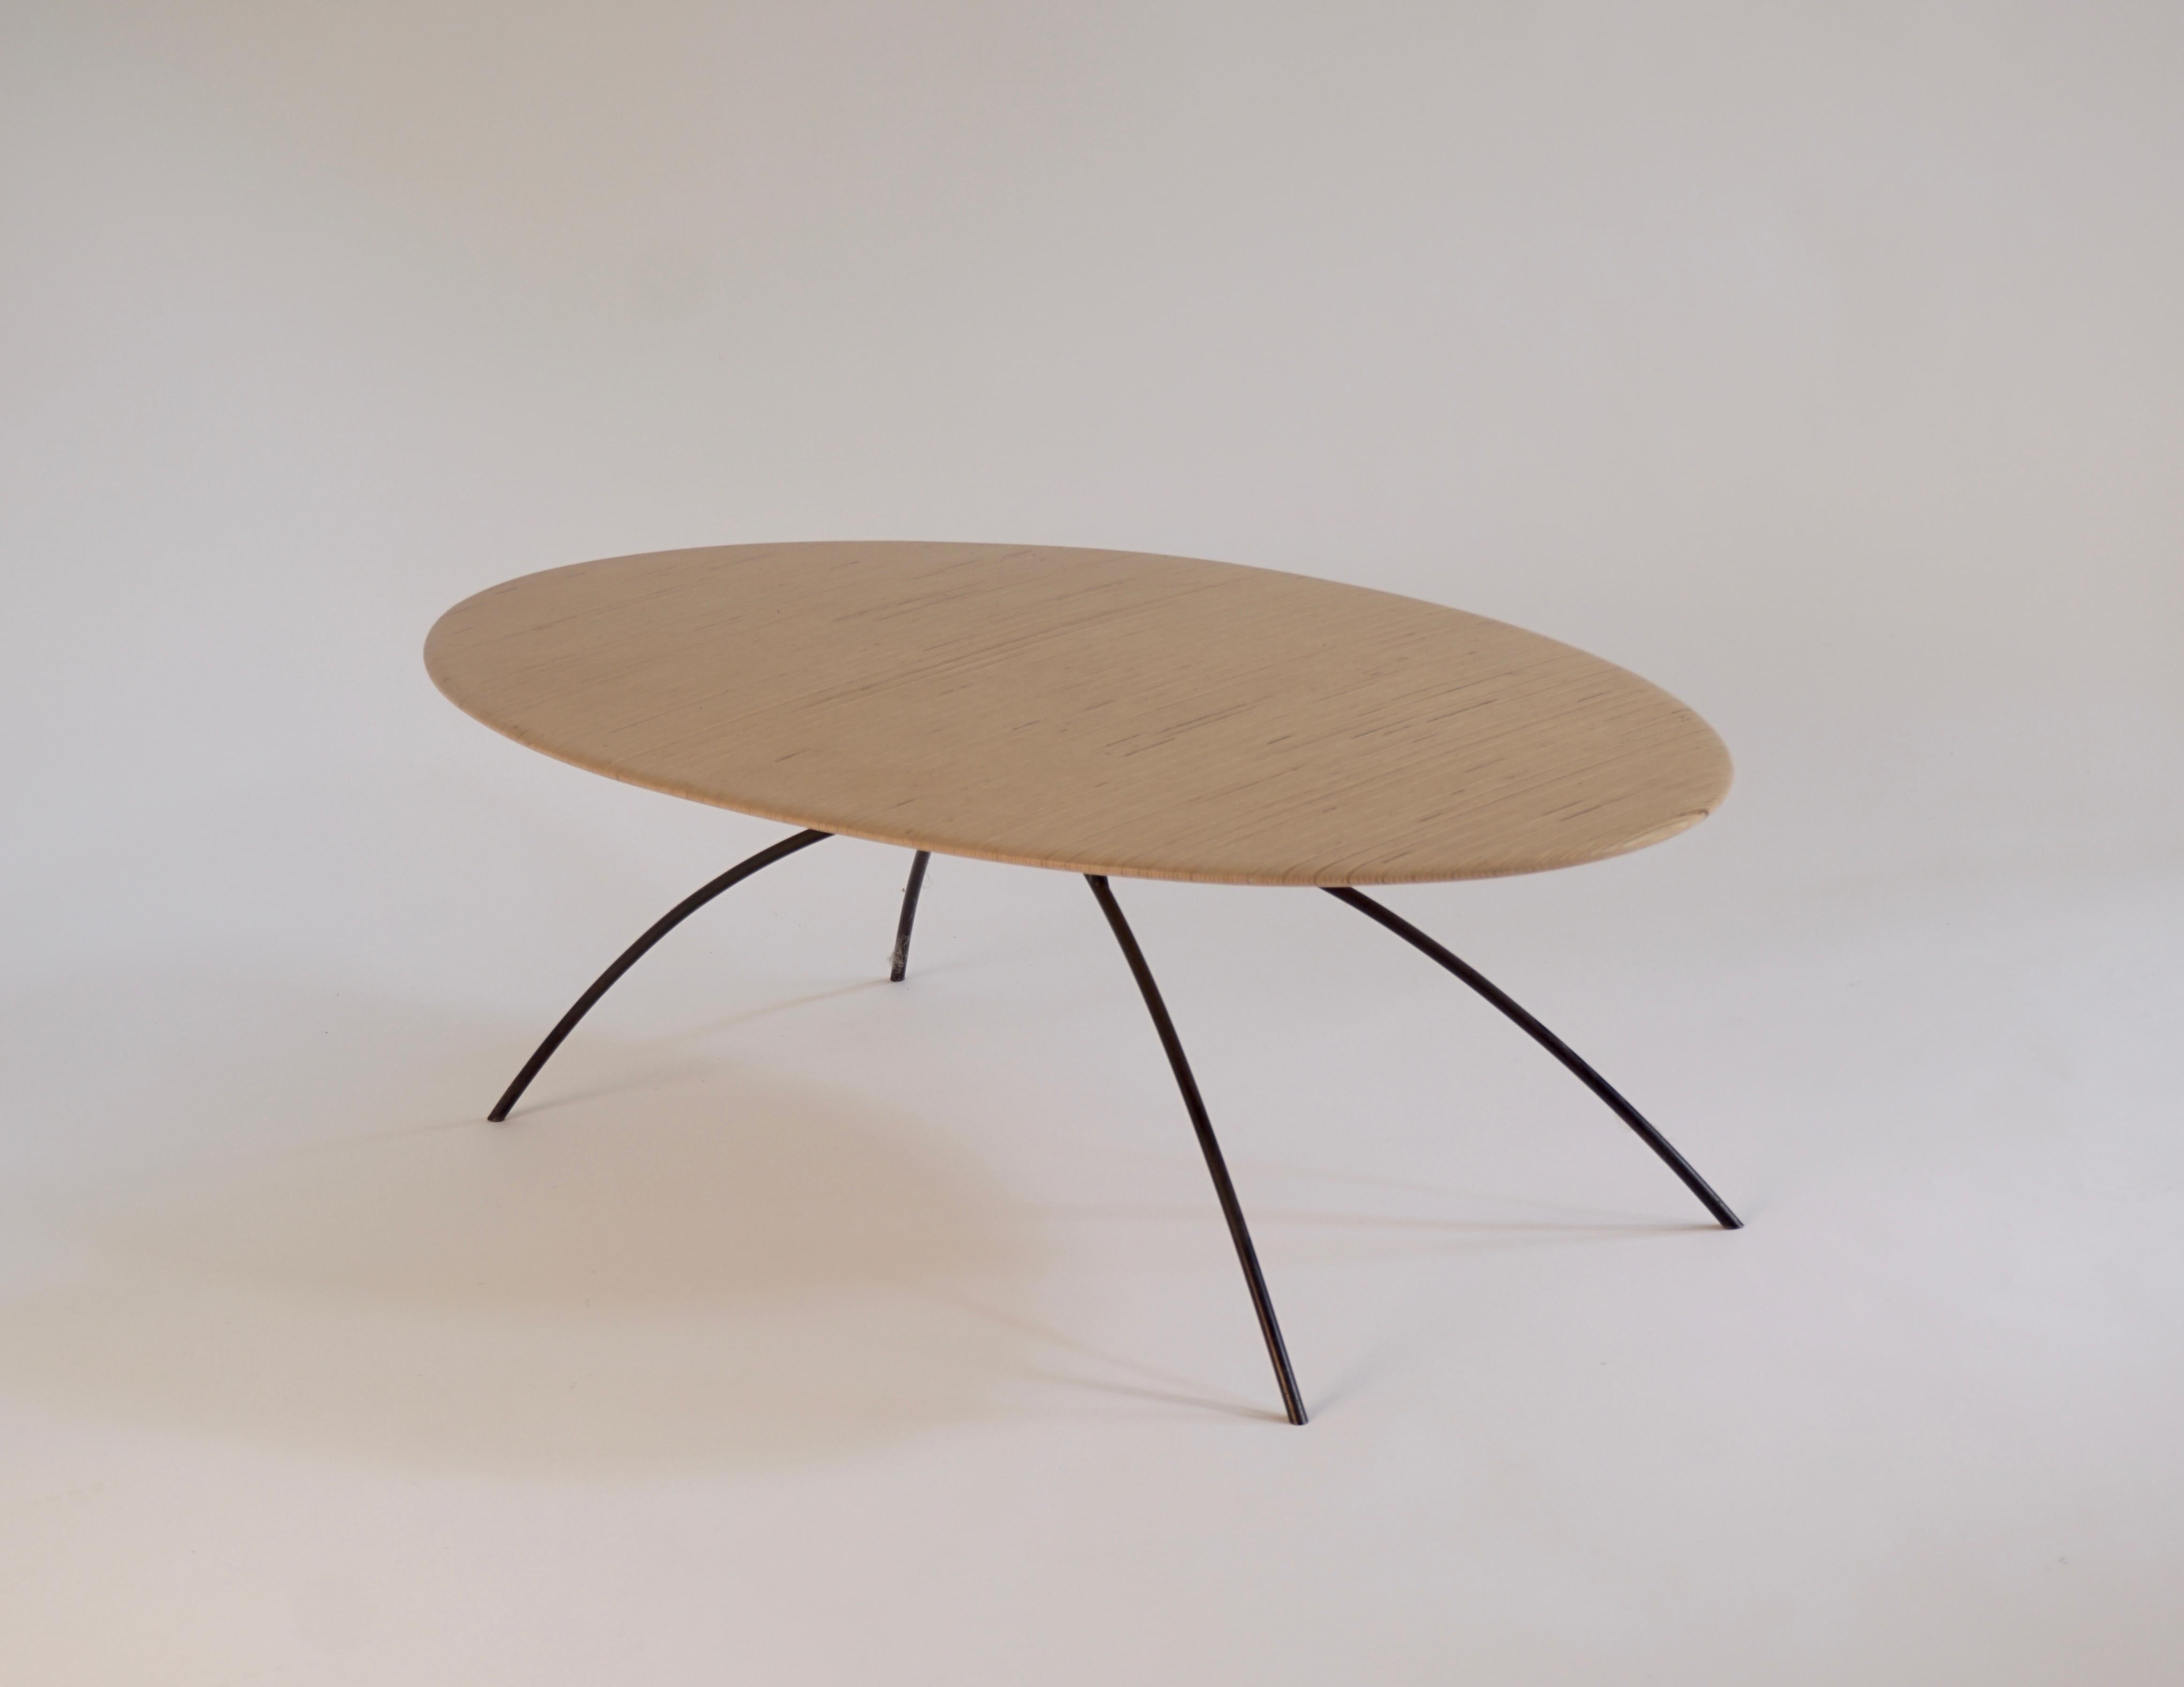 Late 20th Century Sculpted Oval Coffee Table, Laminated Finnland Plywood